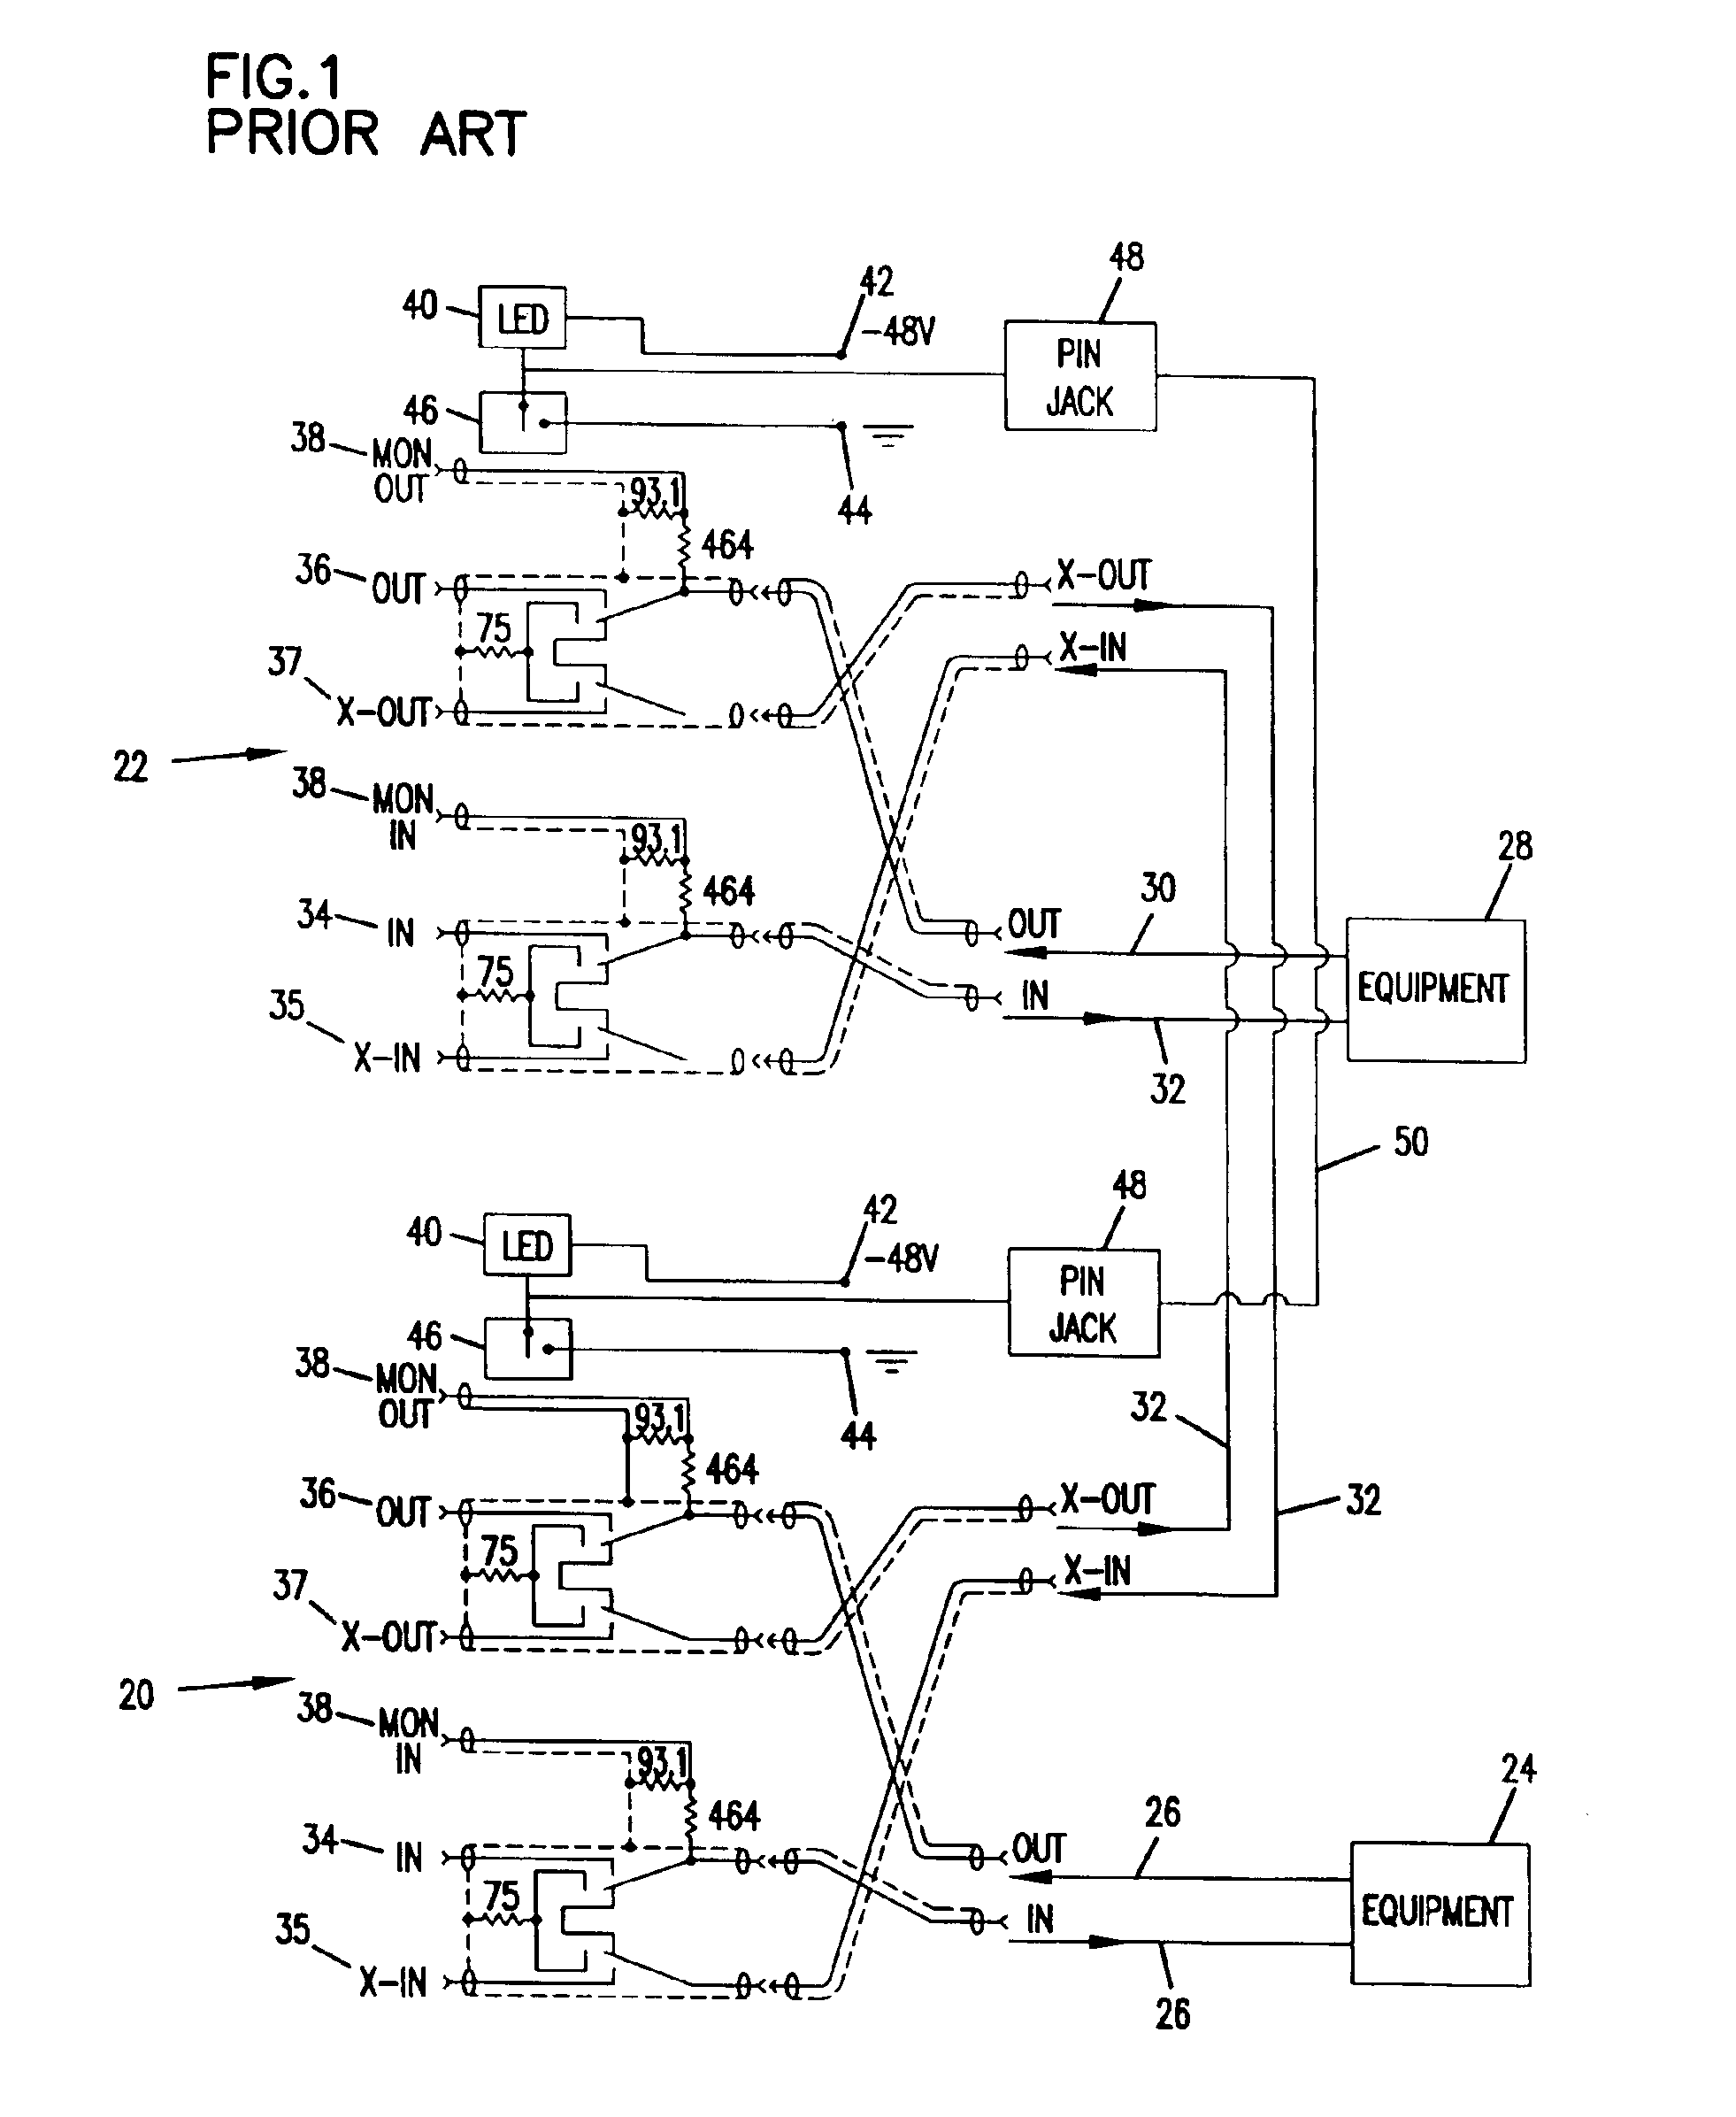 Cross-connect jumper assembly having tracer lamp